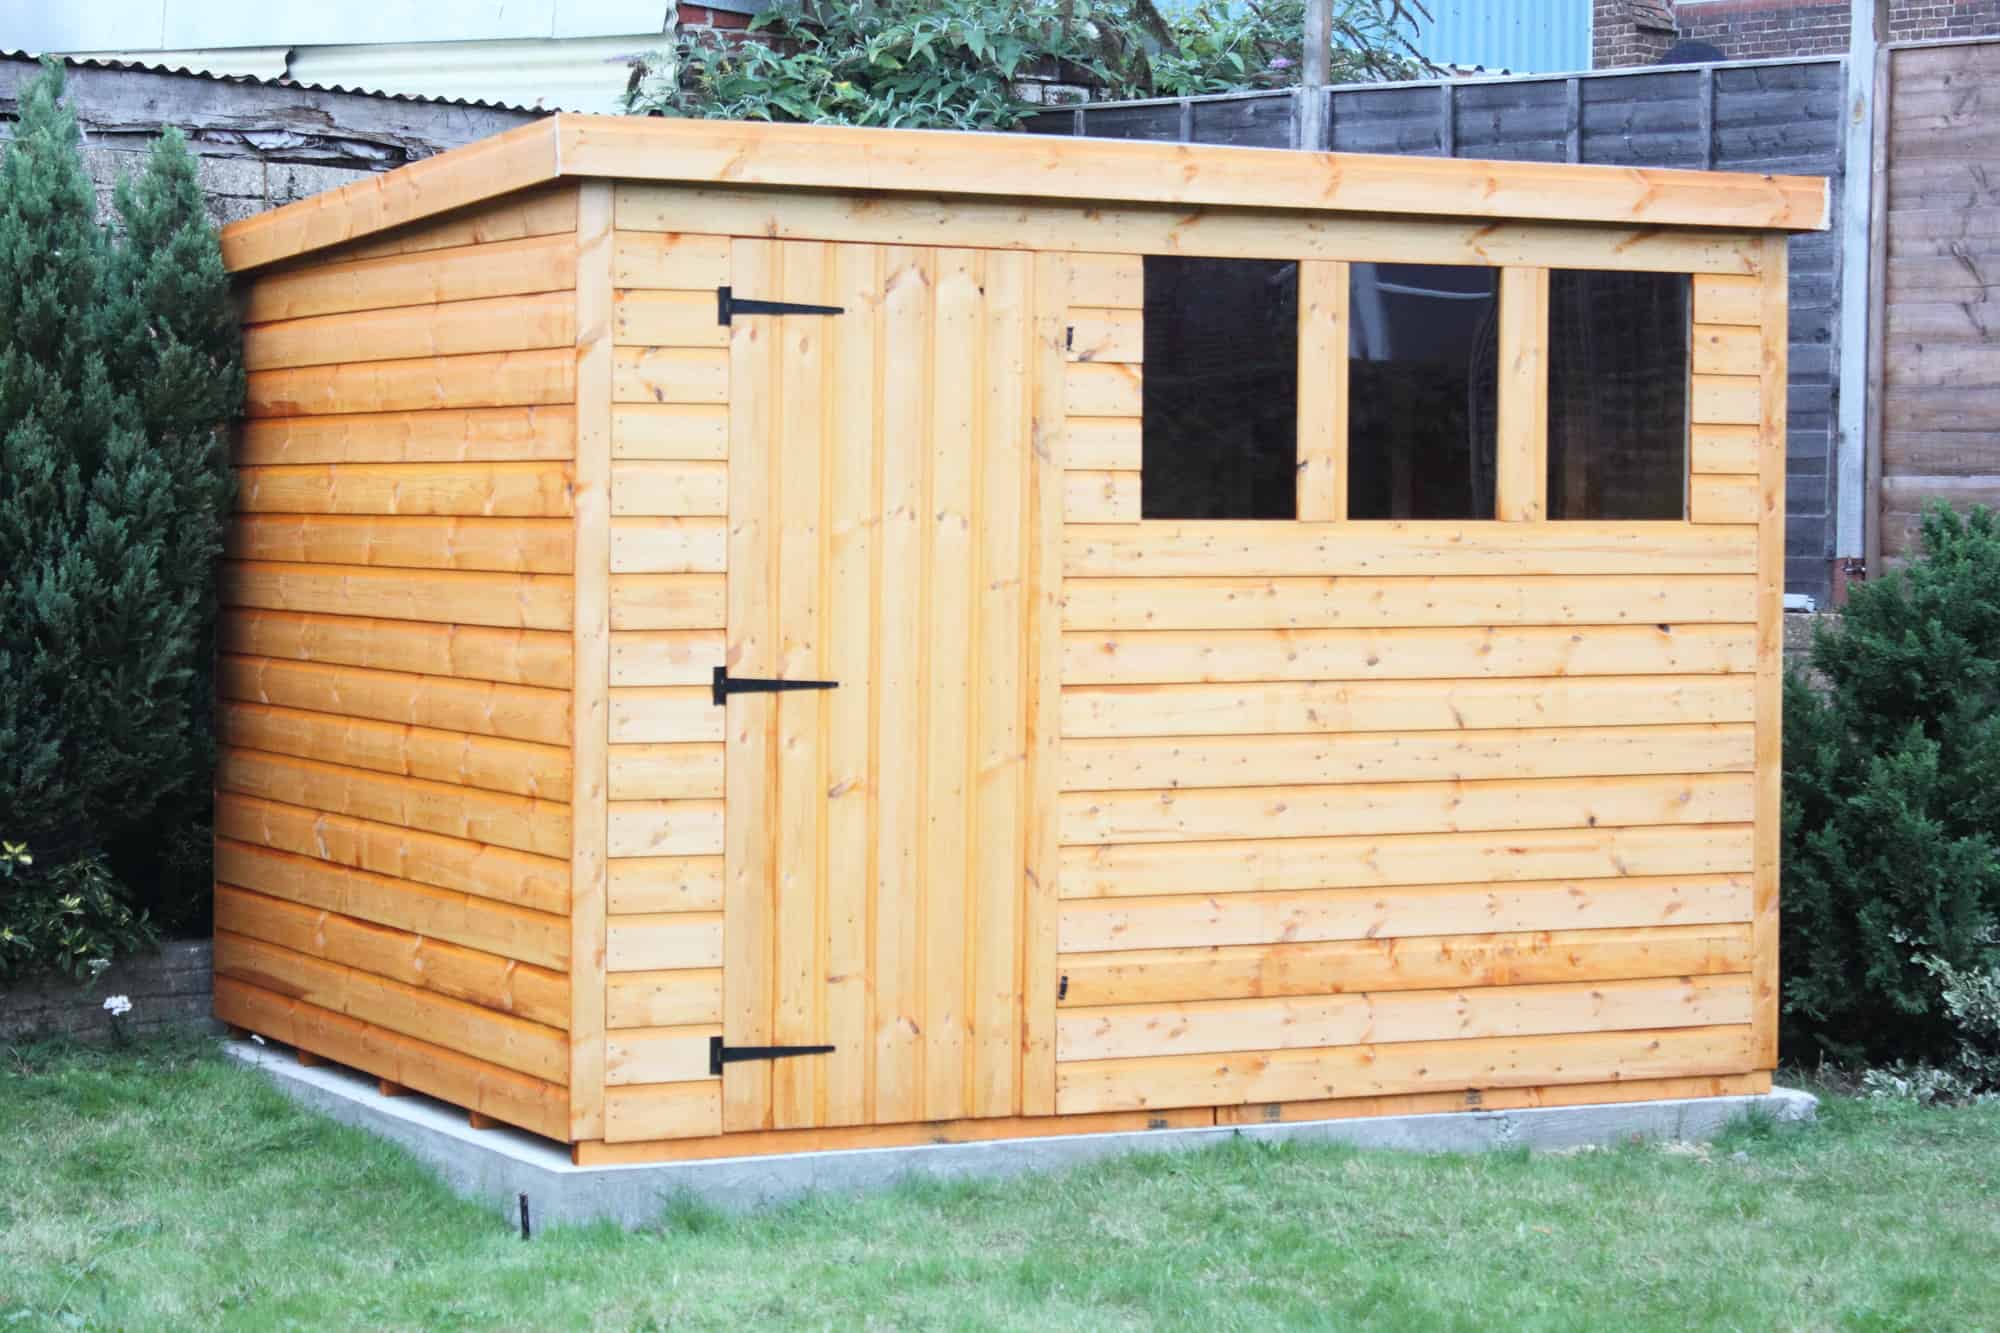 The Best Time of Year To Buy a Storage Shed